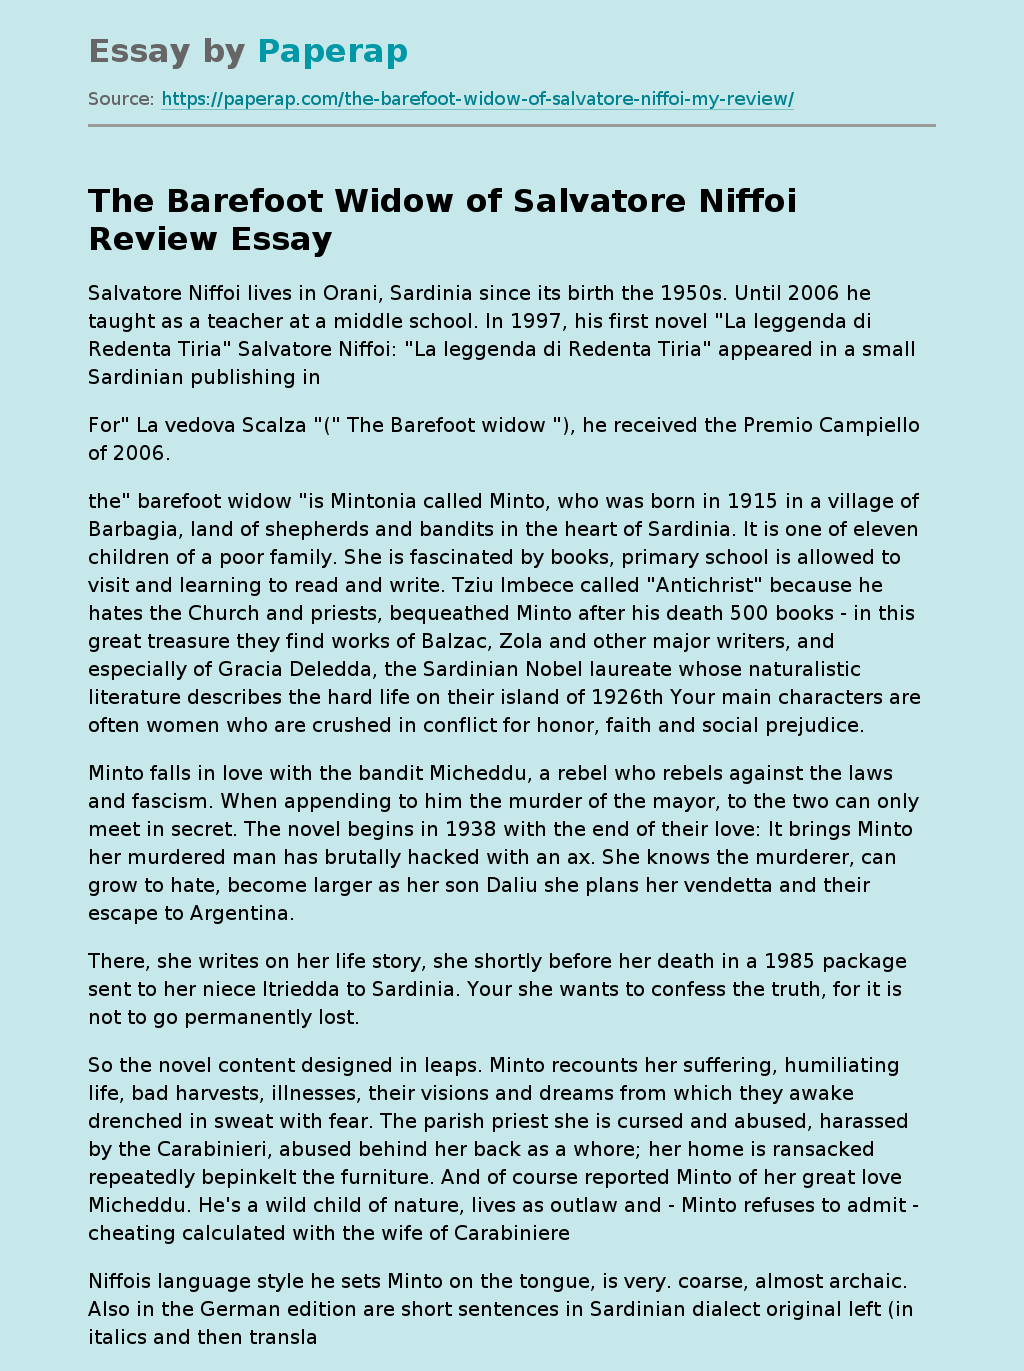 The Barefoot Widow of Salvatore Niffoi Review